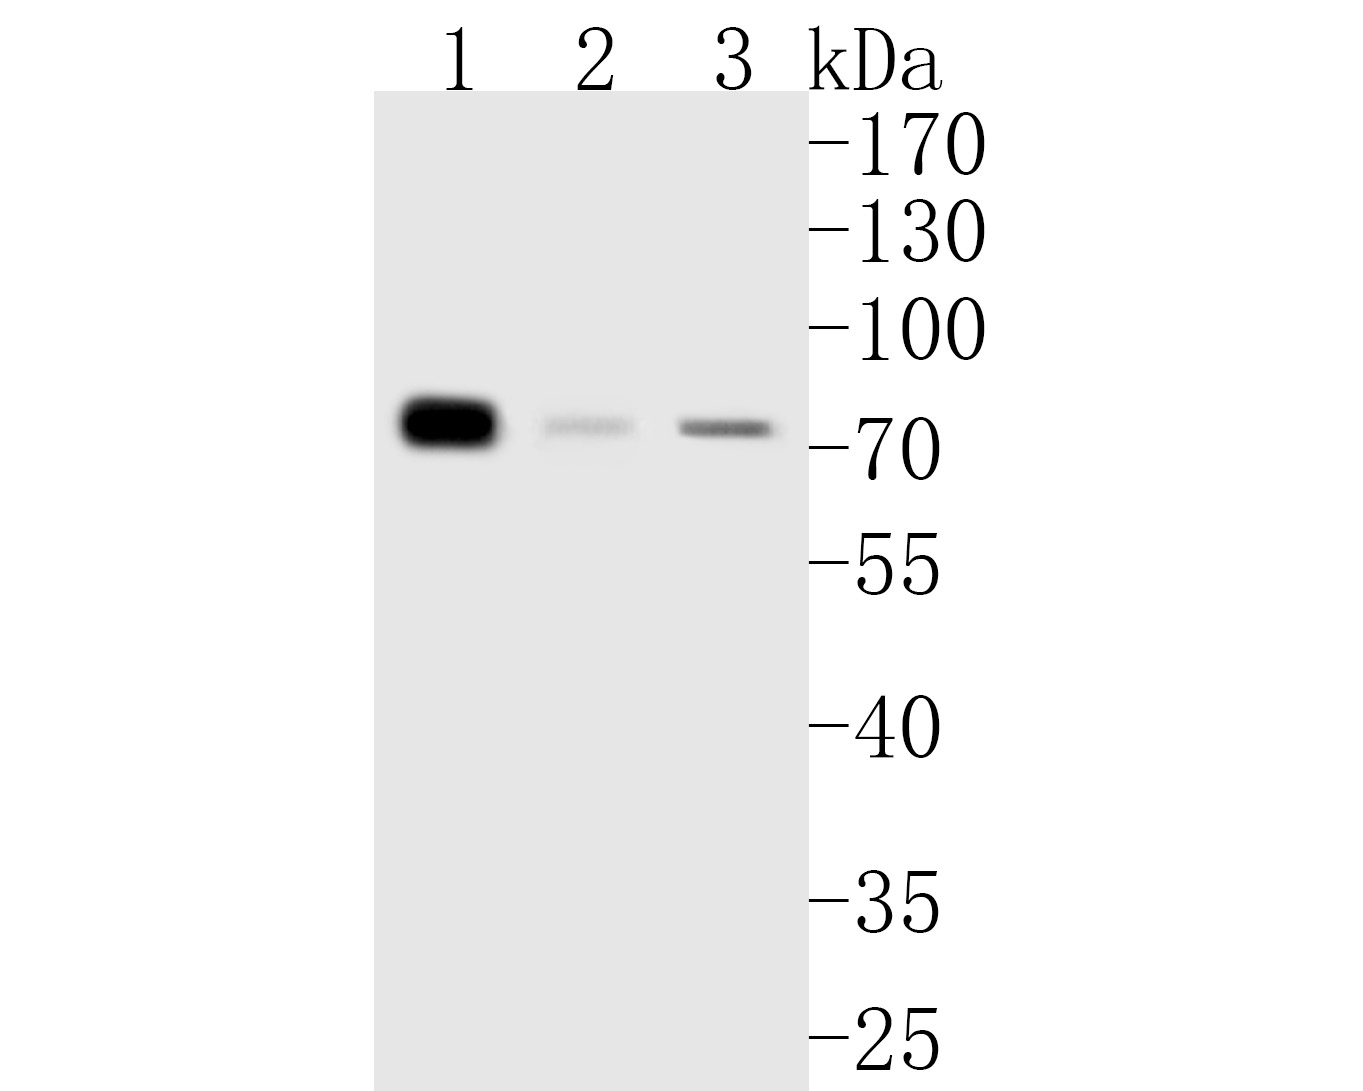 Western blot analysis of HTF9C on different lysates. Proteins were transferred to a PVDF membrane and blocked with 5% BSA in PBS for 1 hour at room temperature. The primary antibody (ET7111-14, 1/1,000) was used in 5% BSA at room temperature for 2 hours. Goat Anti-Rabbit IgG - HRP Secondary Antibody (HA1001) at 1:5,000 dilution was used for 1 hour at room temperature.<br />
Positive control: <br />
Lane 1: 293 cell lysate<br />
Lane 2: Jurkat cell lysate<br />
Lane 2: MCF-7 cell lysate